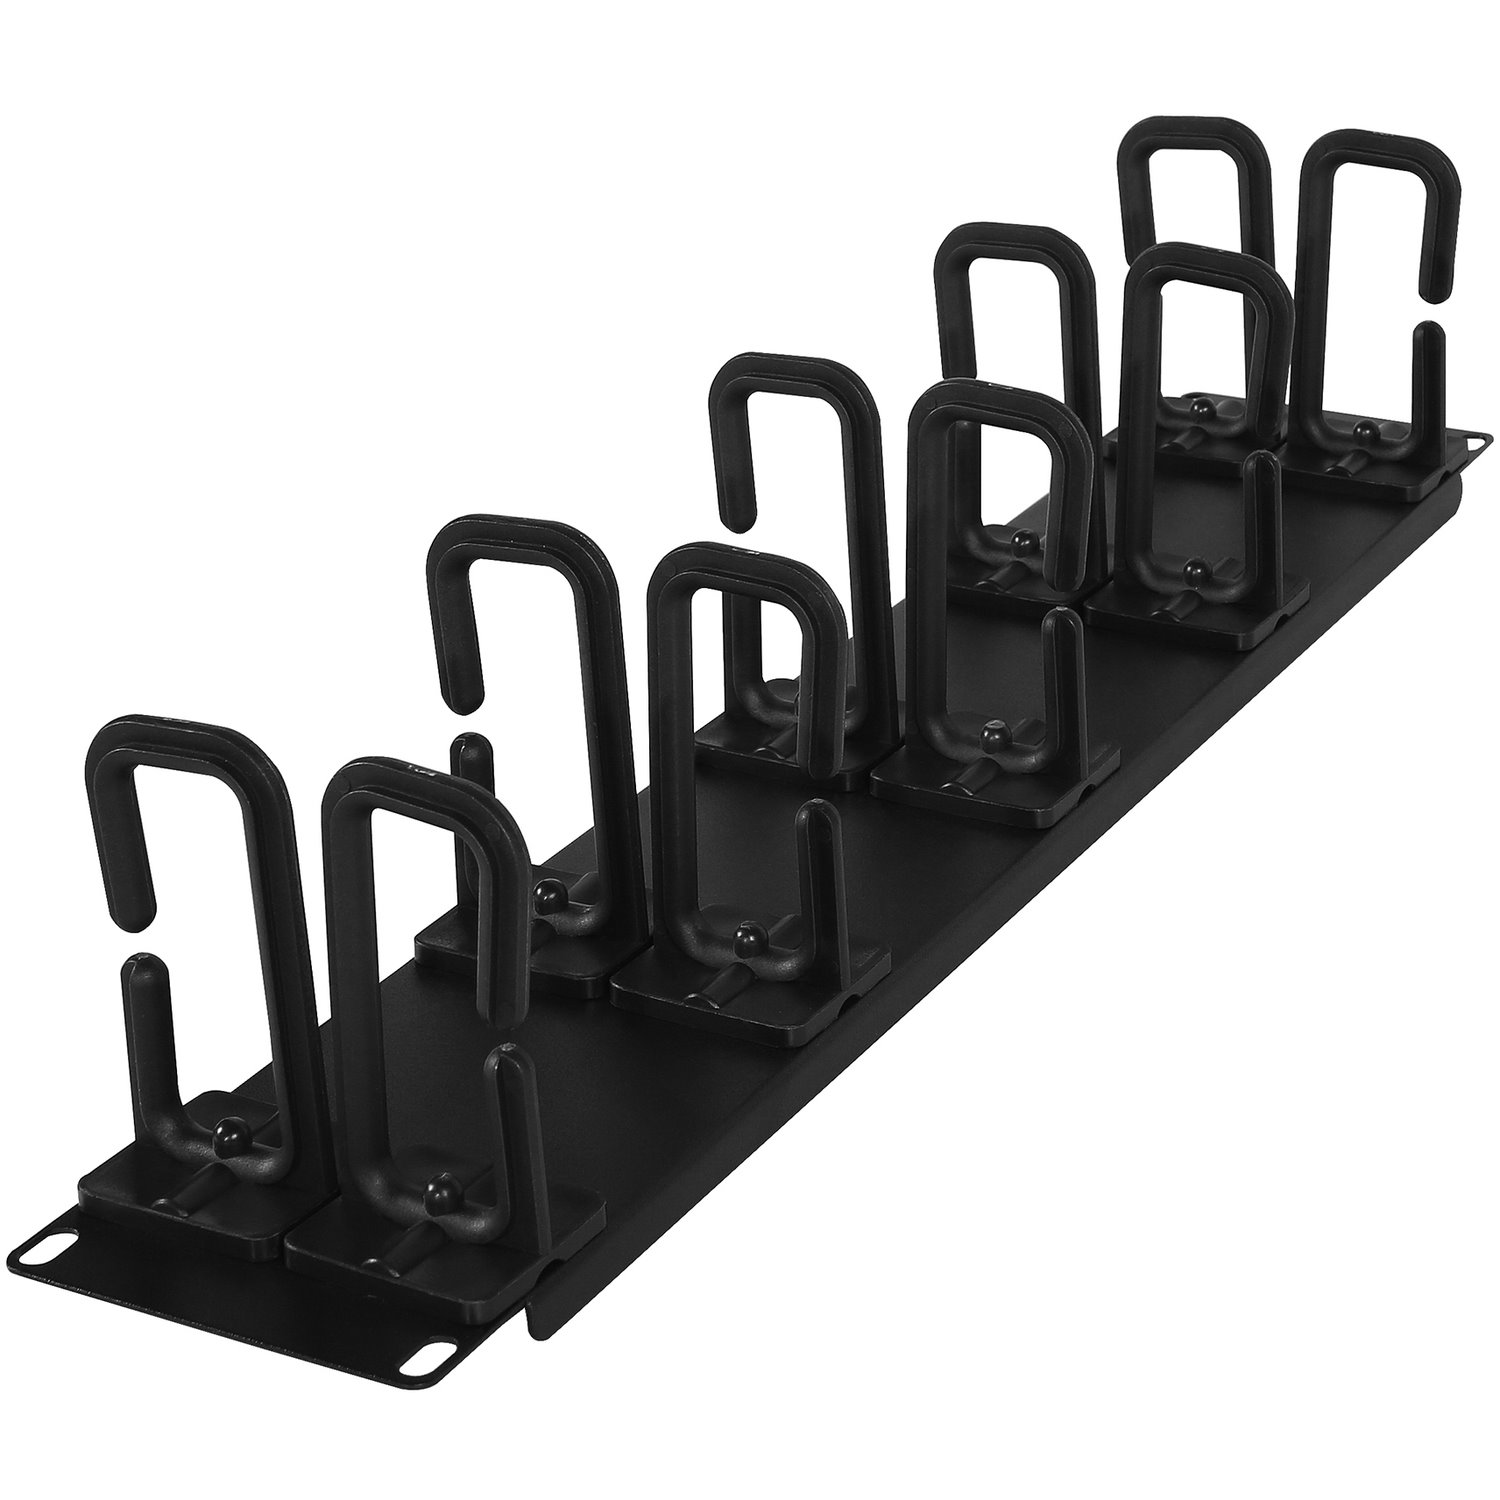 CyberPower Carbon CRA30006 Cable Organizer